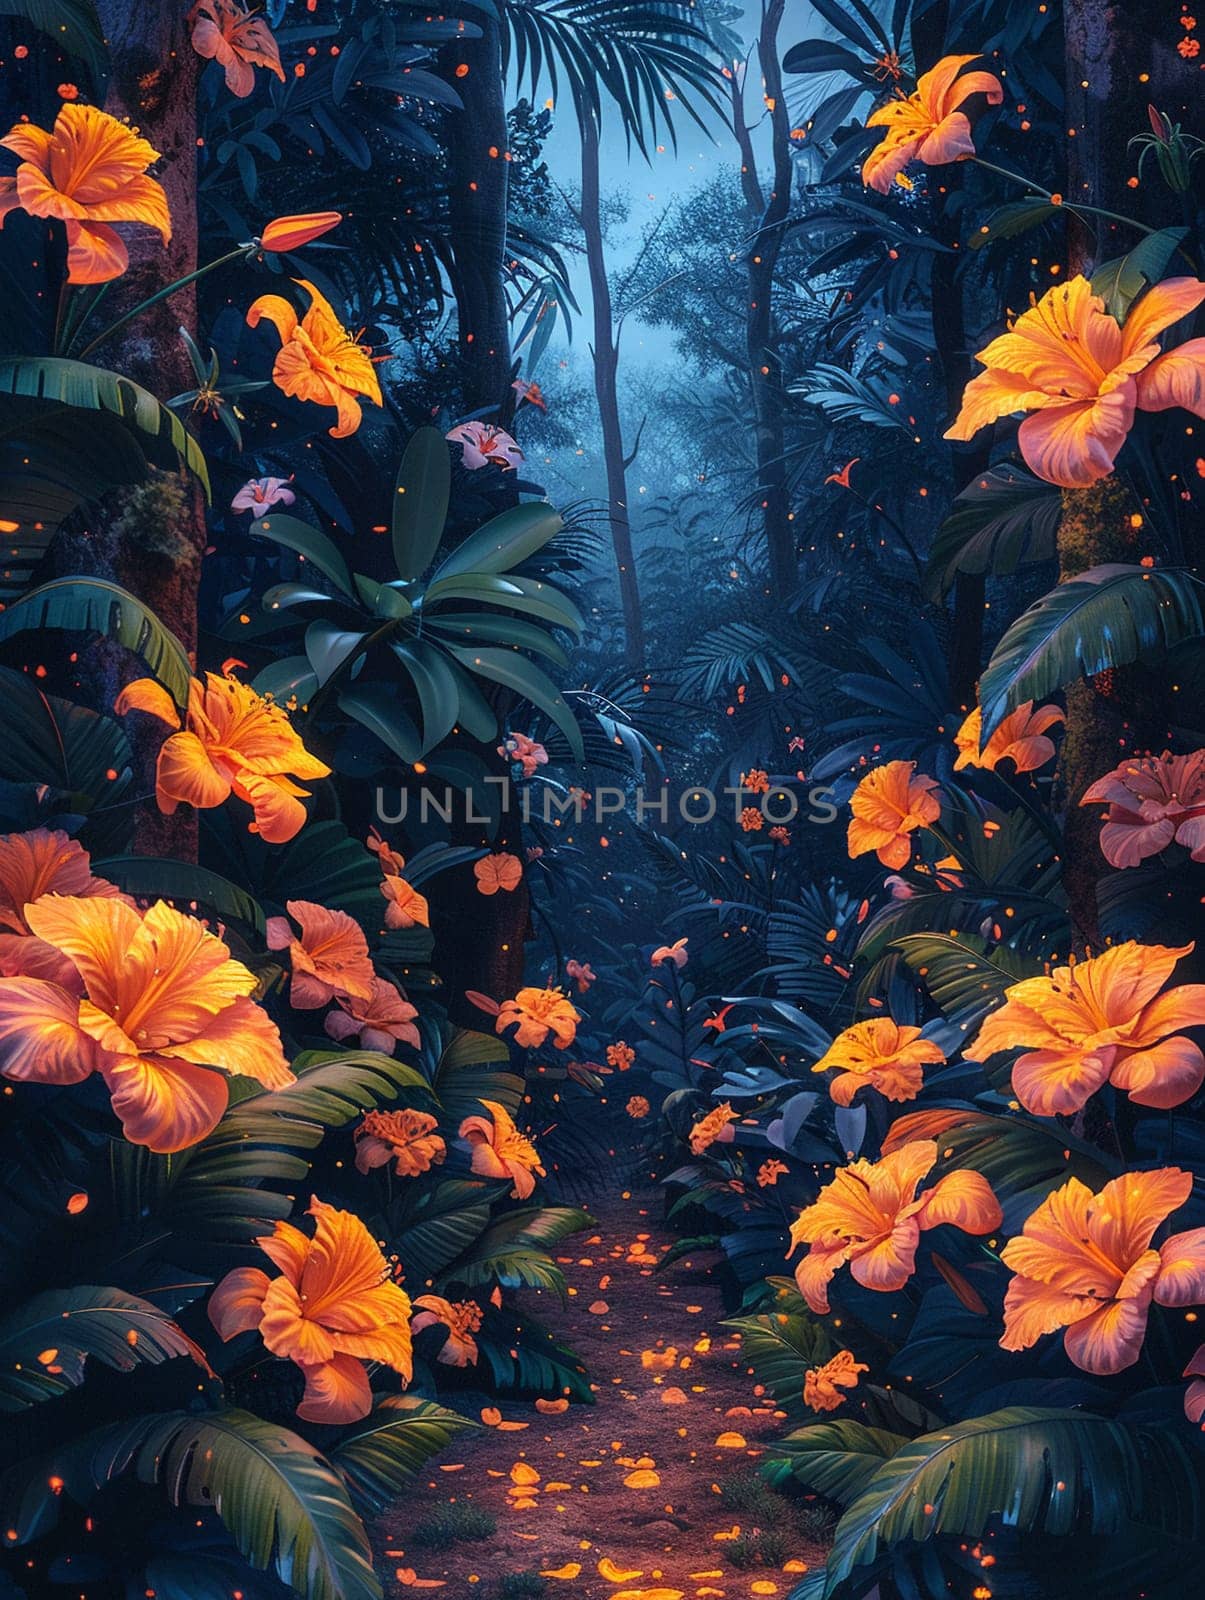 Flower garden at night, illuminated by bioluminescent plants in a magical illustration.